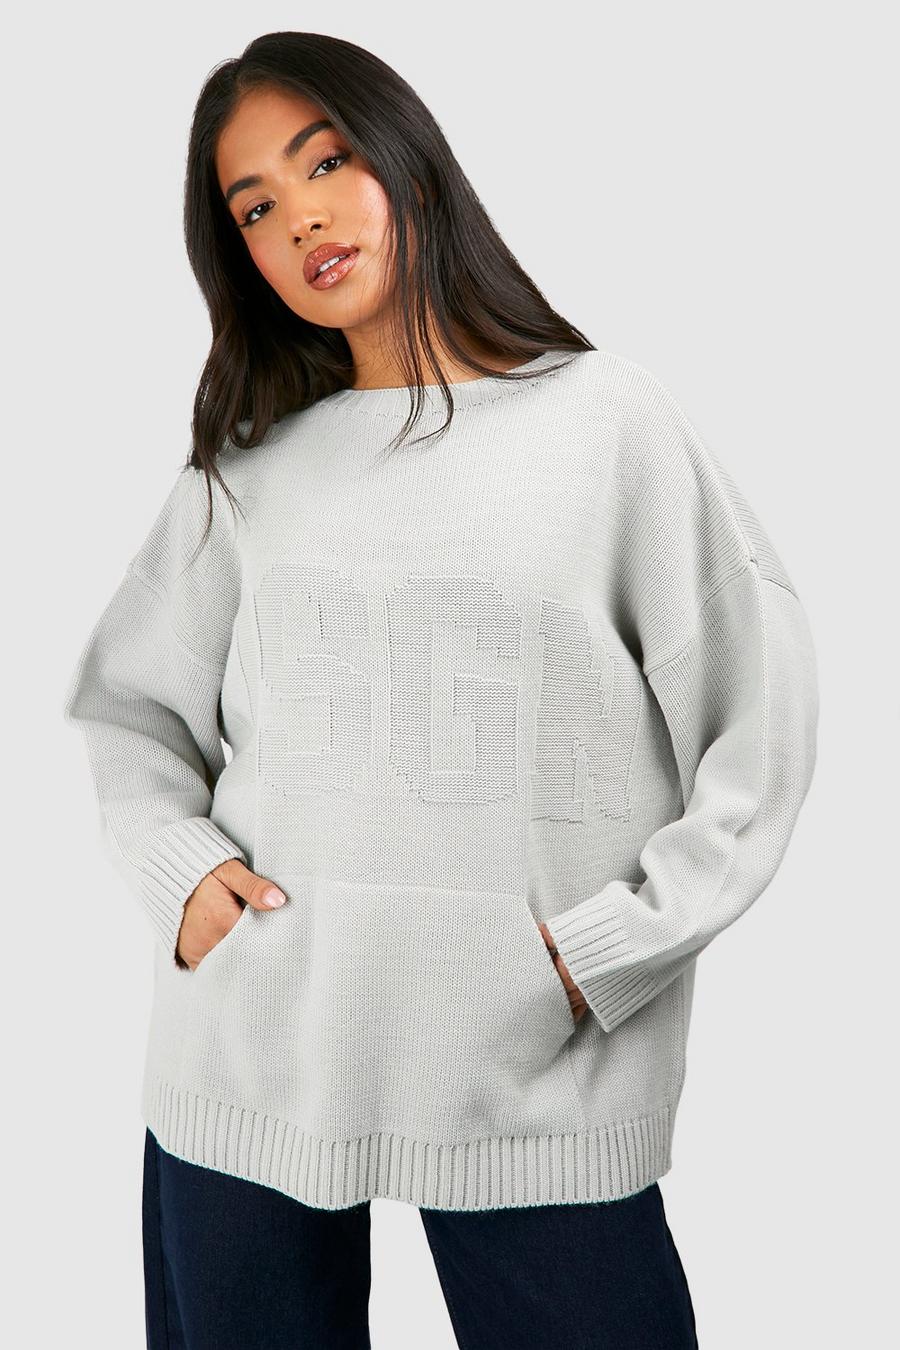 Silver Dsgn Embossed Knitted Sweater